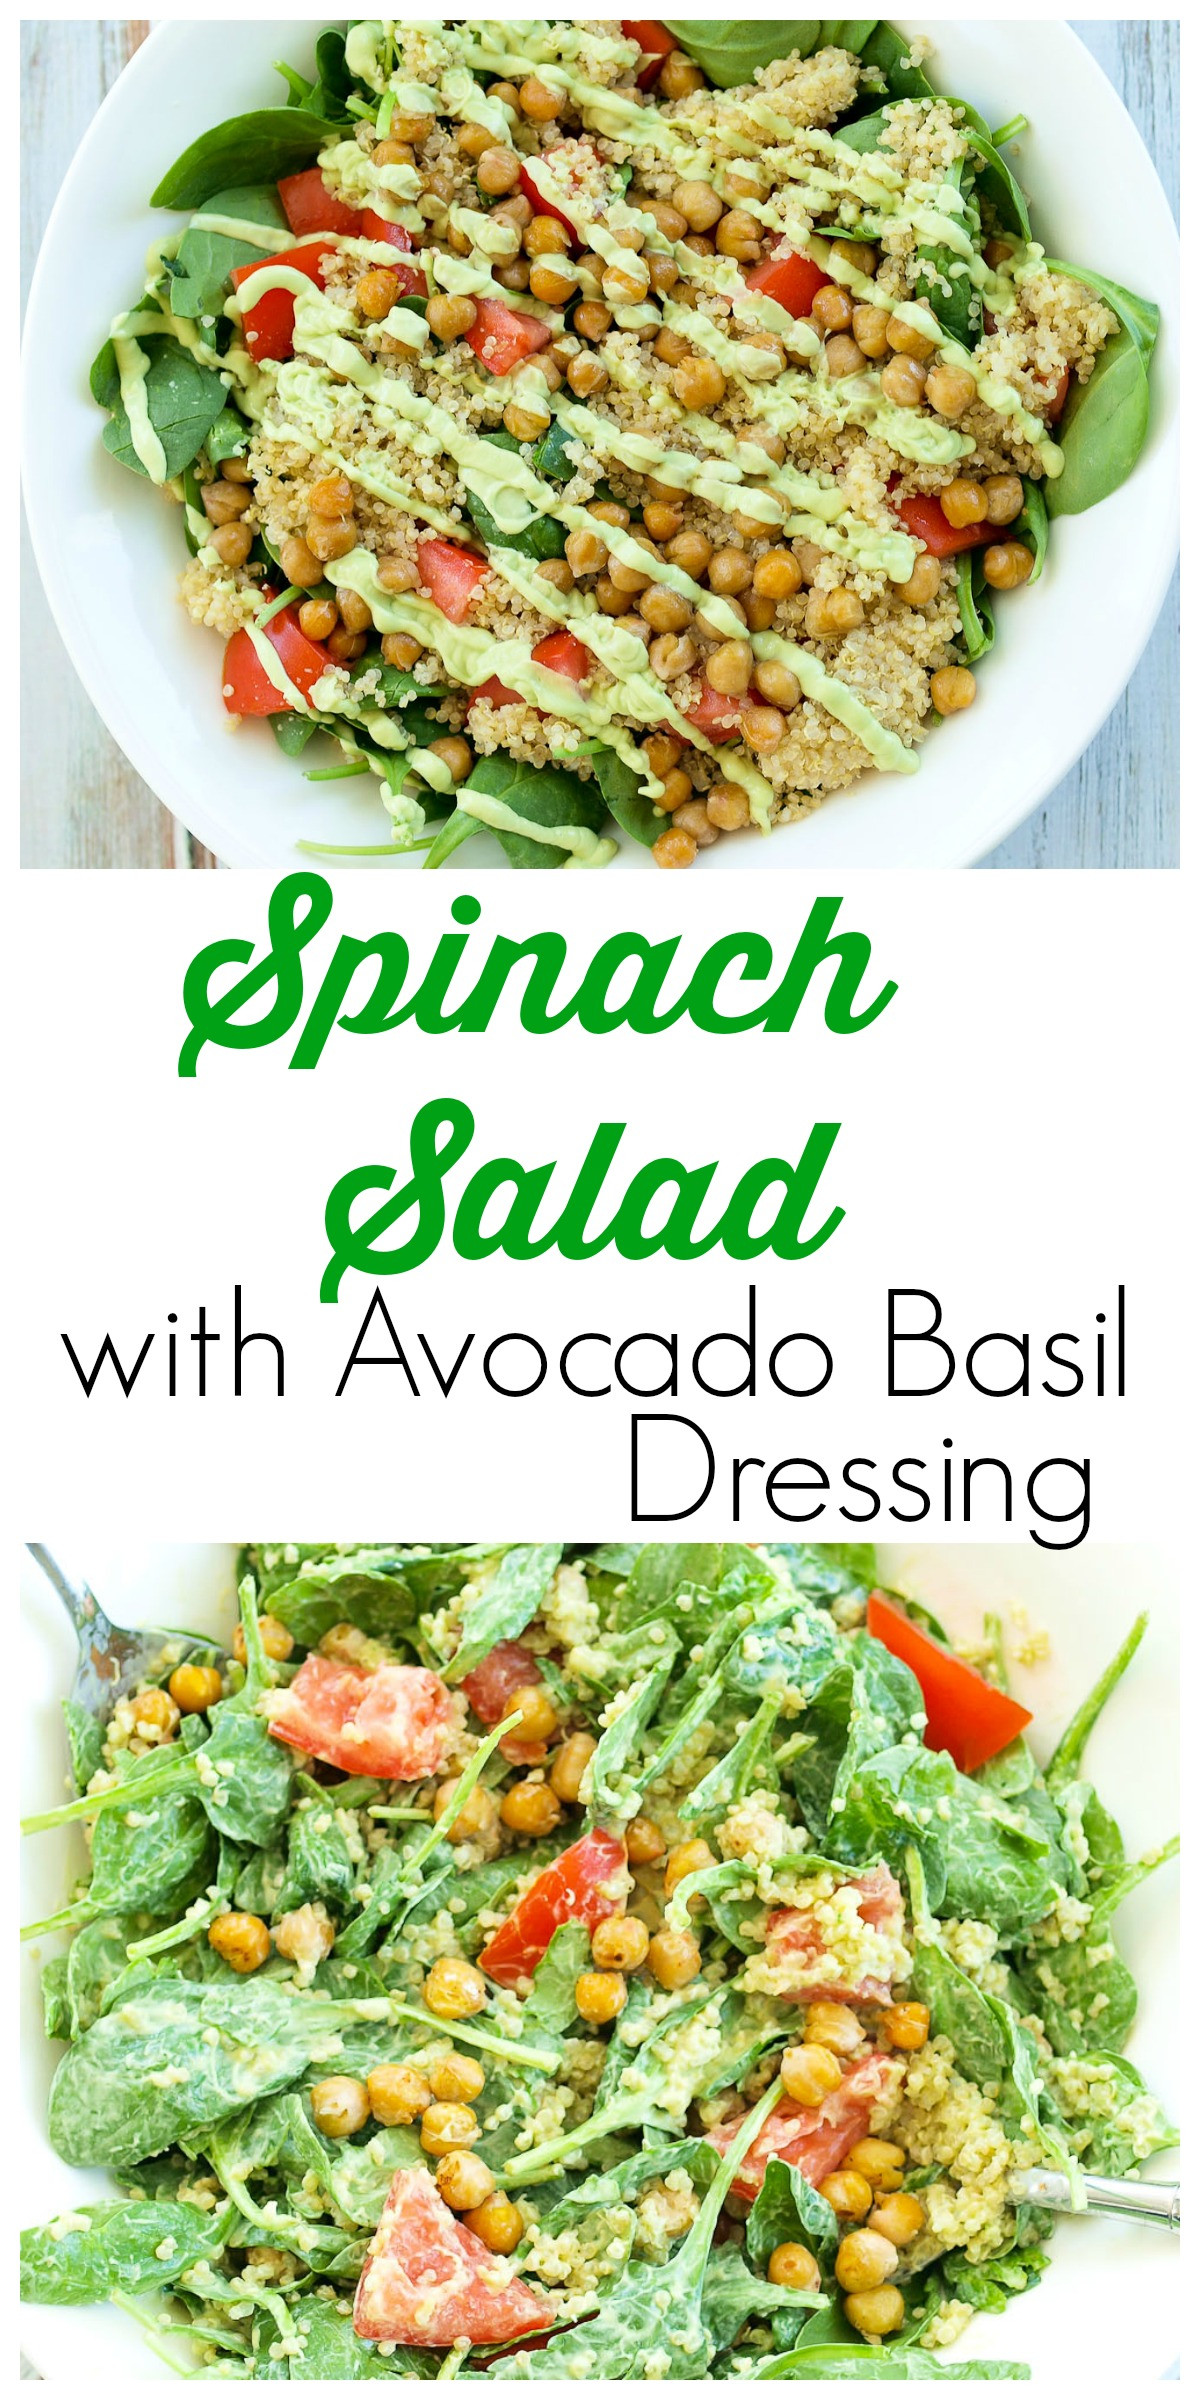 Vegetarian Spinach Salad Recipes
 Loaded Spinach Salad with Creamy Avocado Basil Dressing